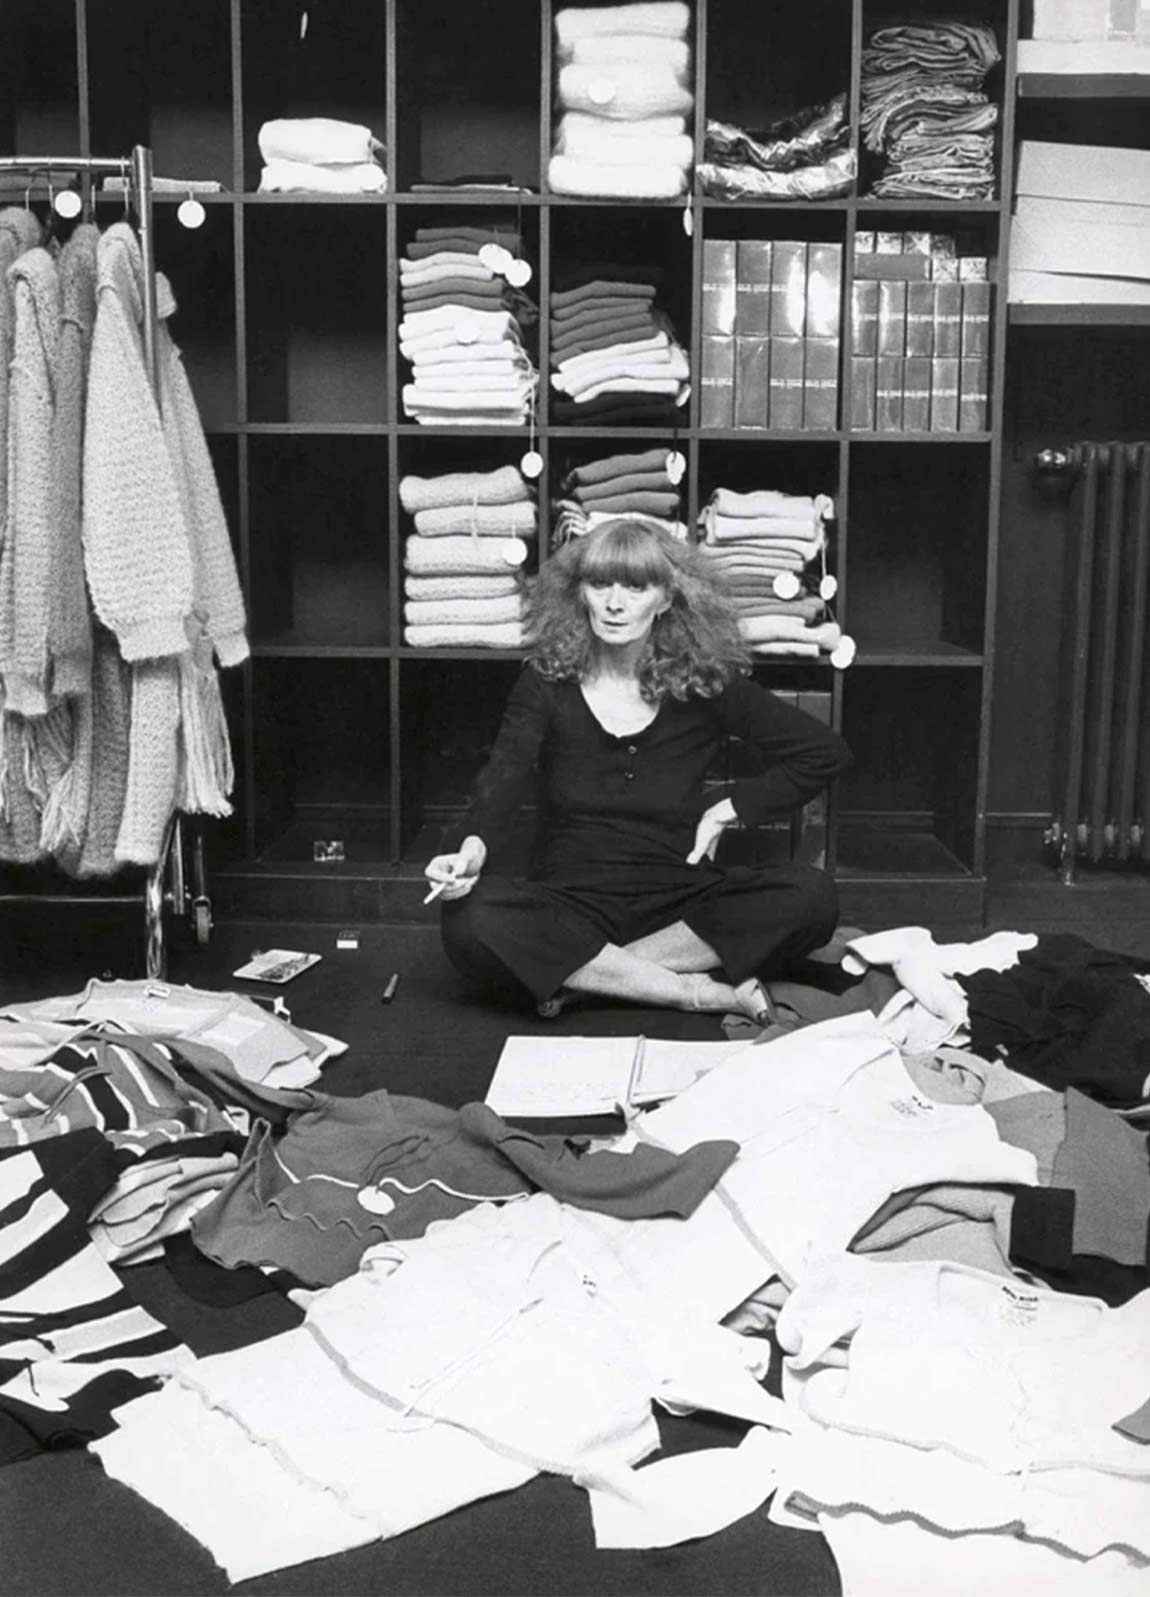 Sonia Rykiel in one of her stores